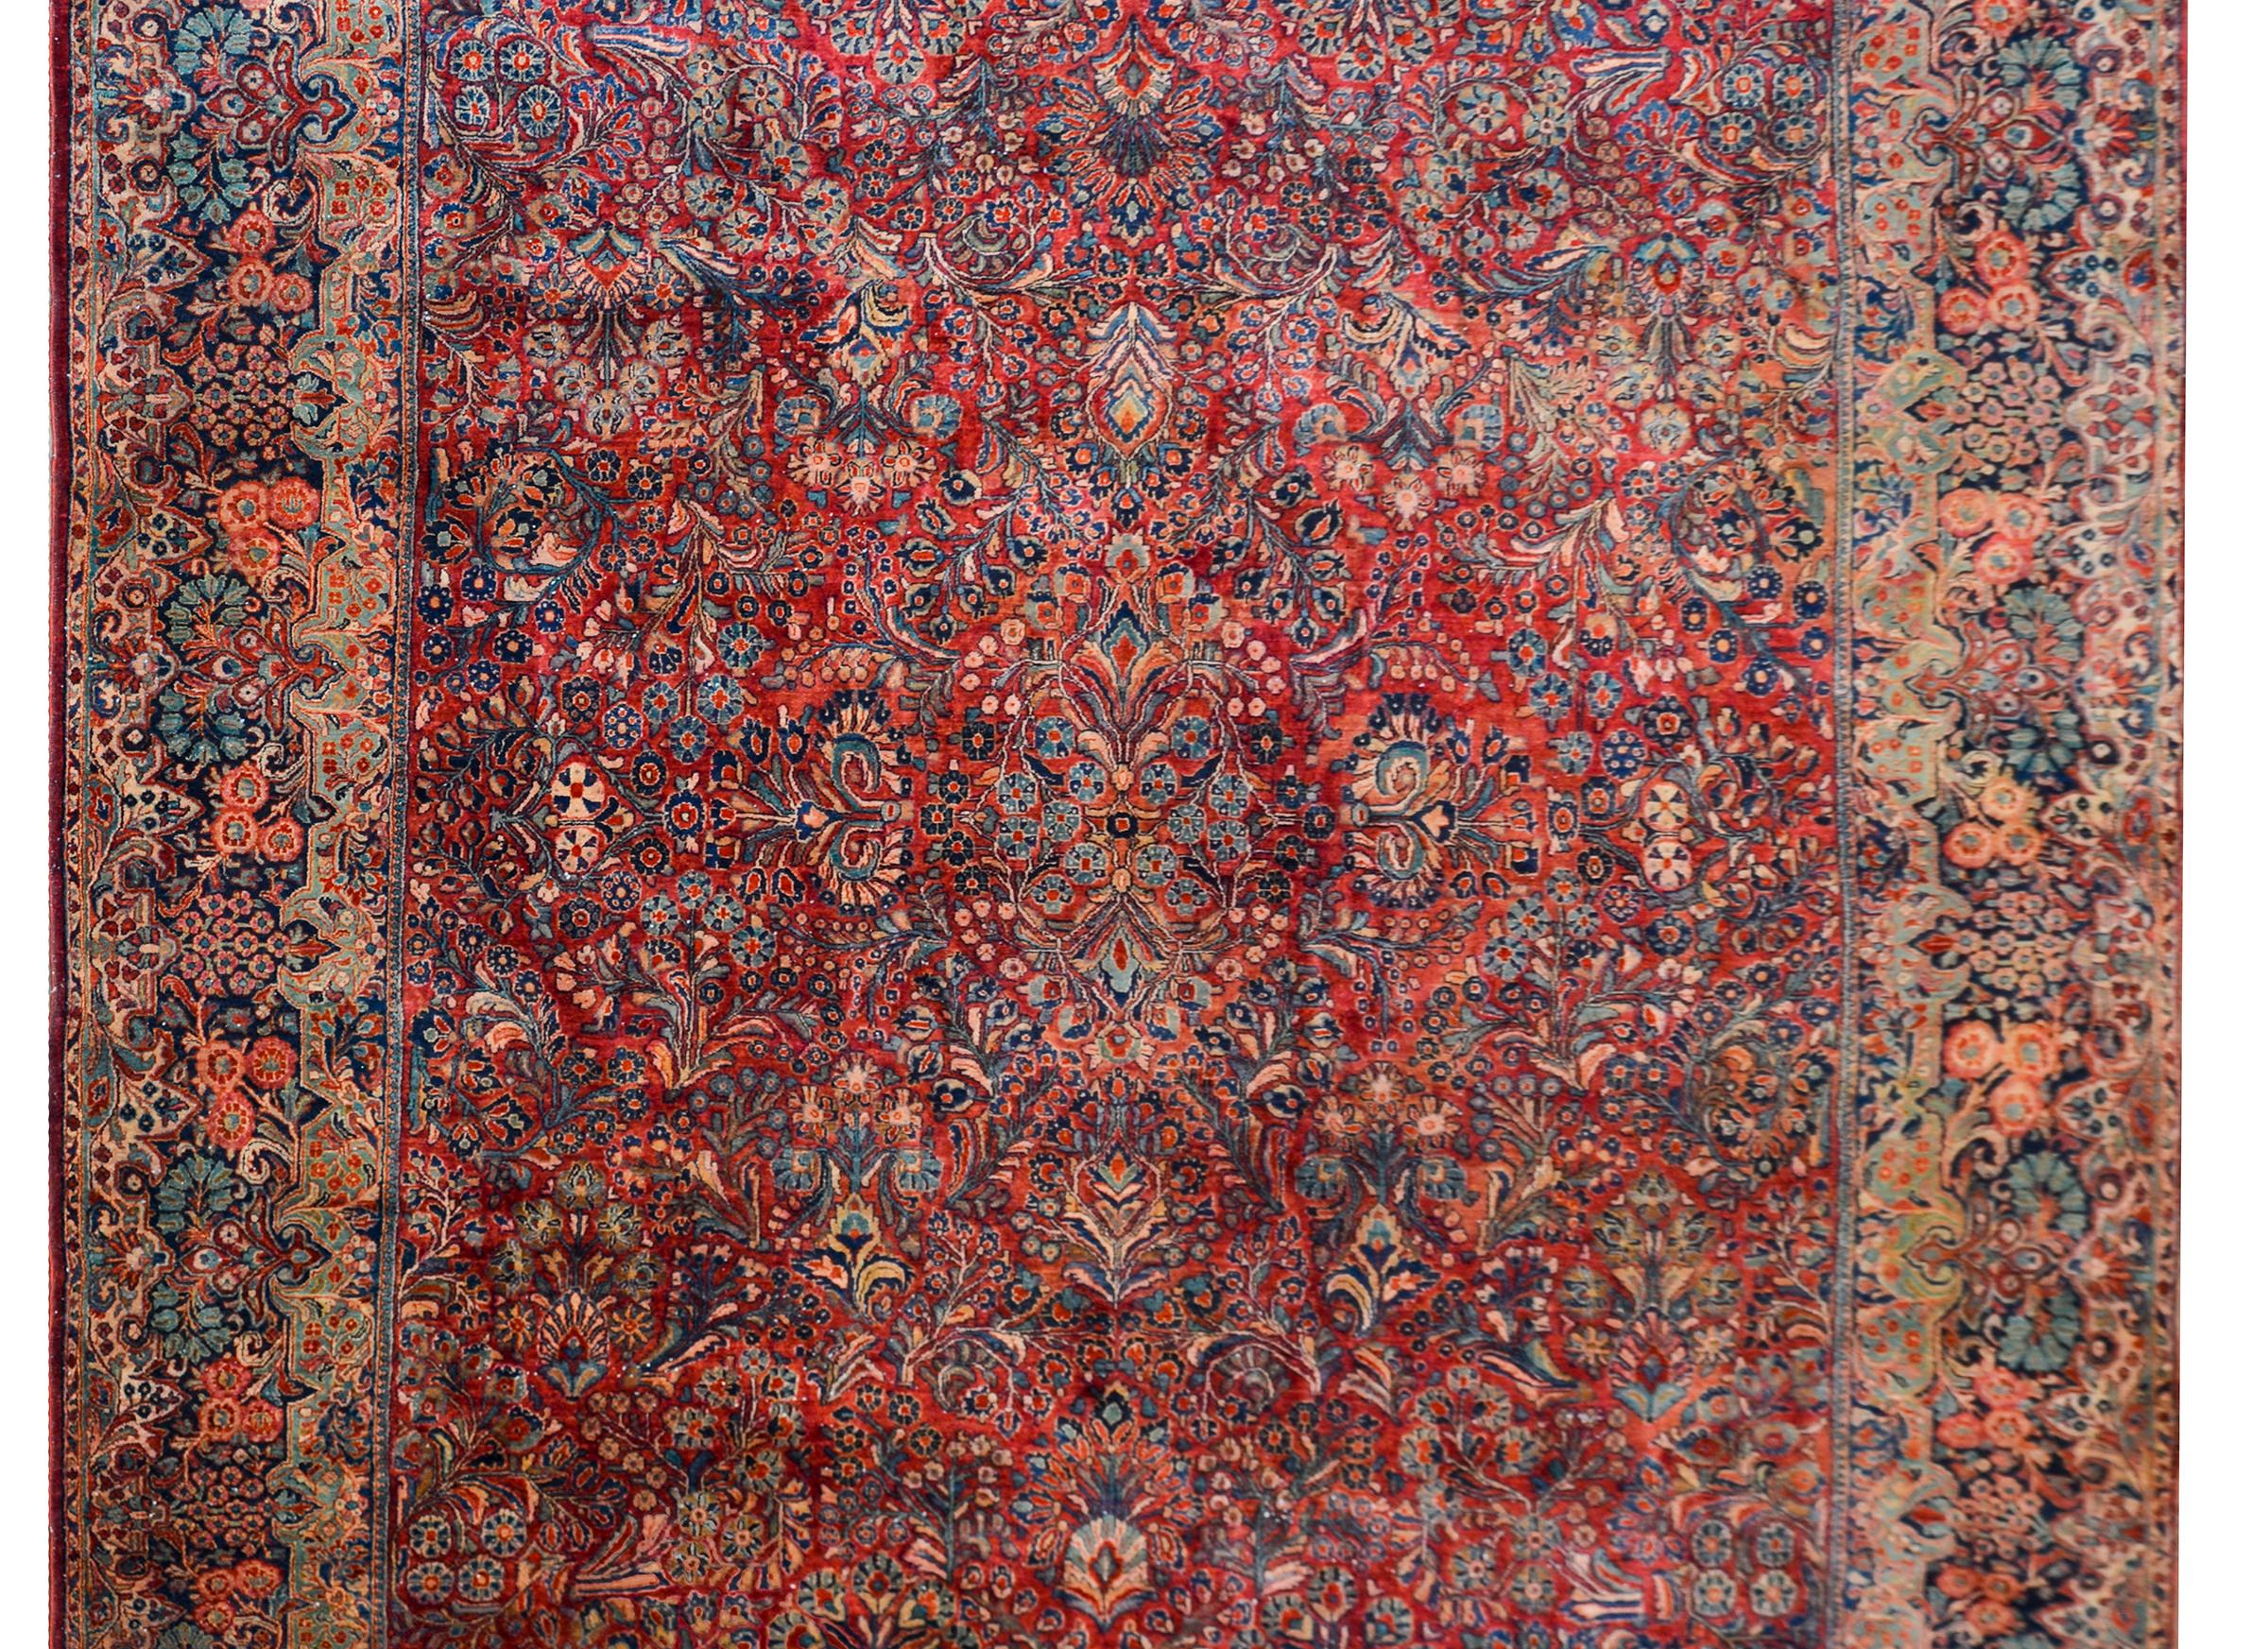 An outstanding early 20th century Sarouk rug with a traditional all-over mirrored floral pattern woven in rich indigos, cranberries, and cream colors, and surrounded by one of the best floral partnered borders we've seen in a long time!